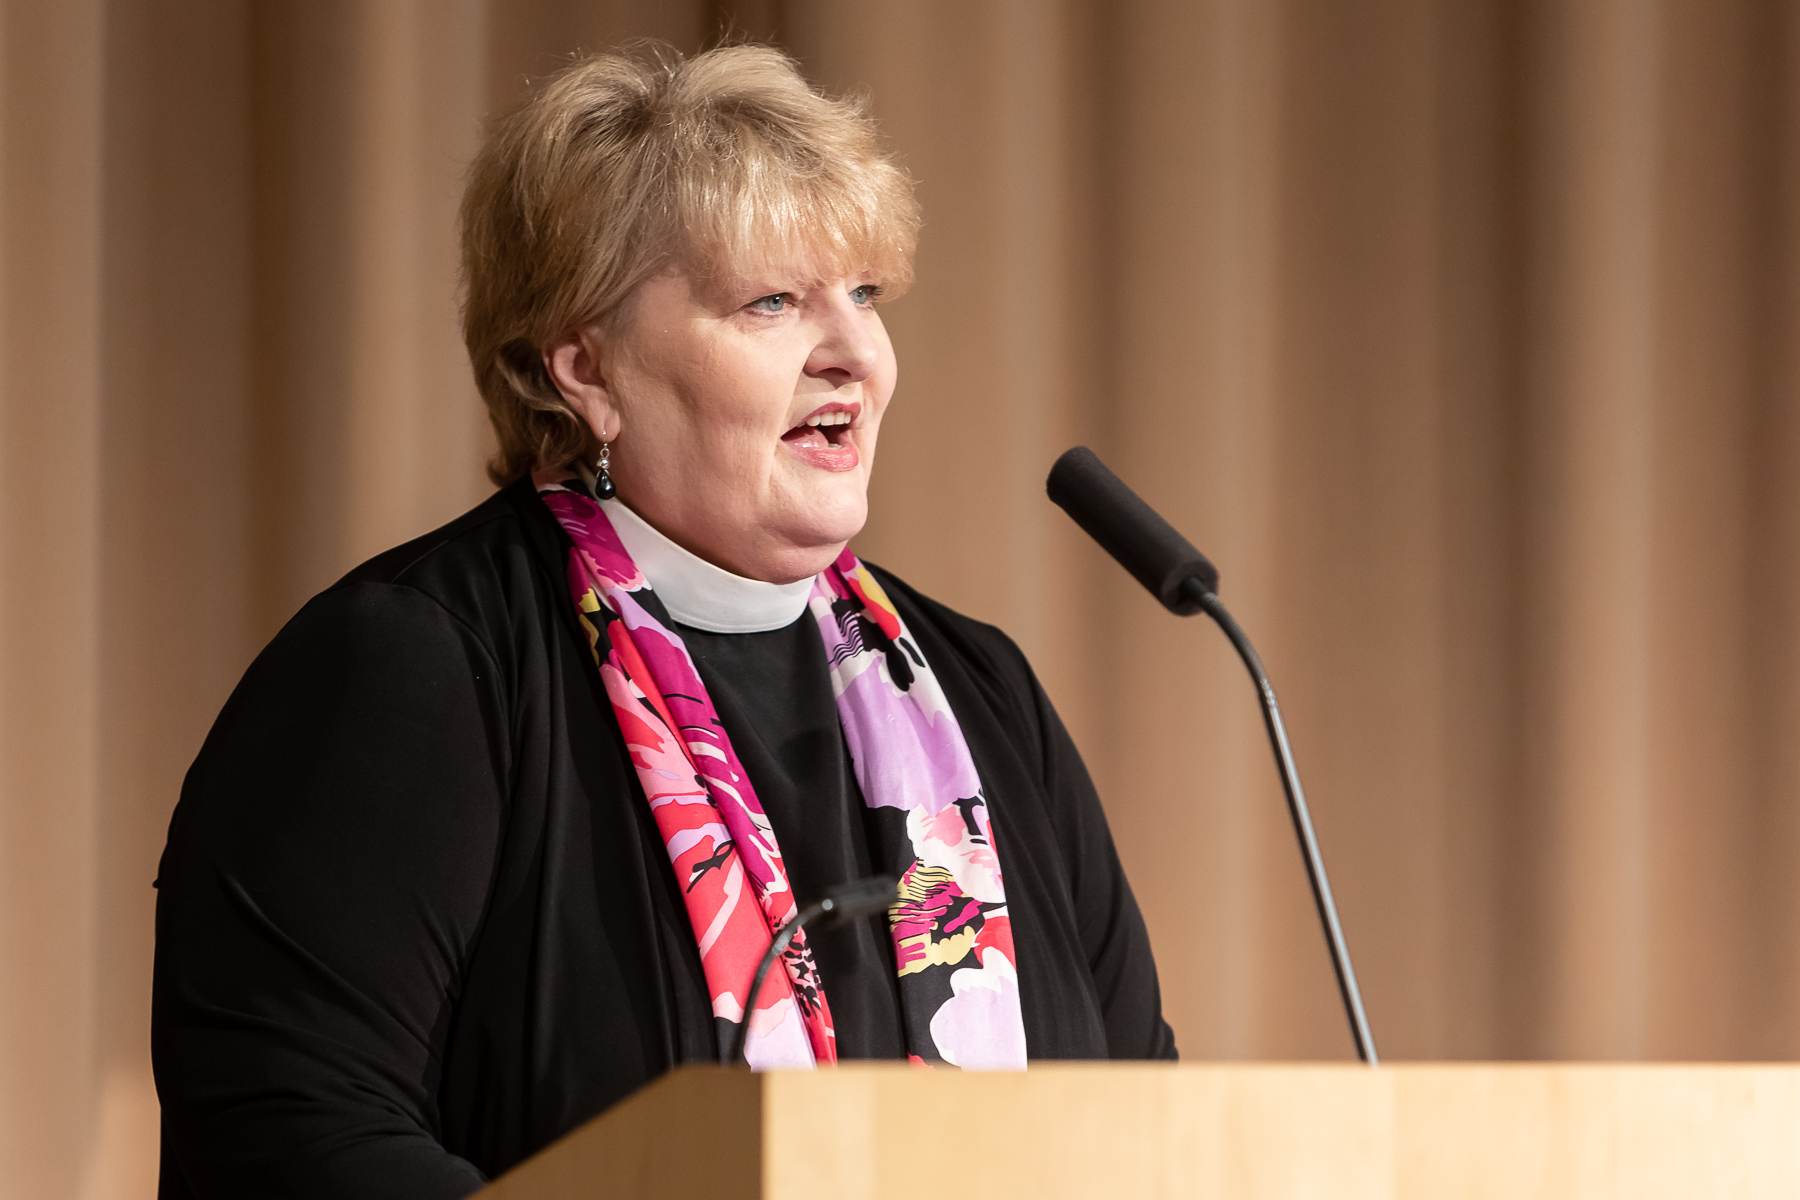 The Rev. Diane Dardon, MDiv, director of religious diversity and pastoral care, offers an invocation during the luncheon. (DePaul University/Jeff Carrion)